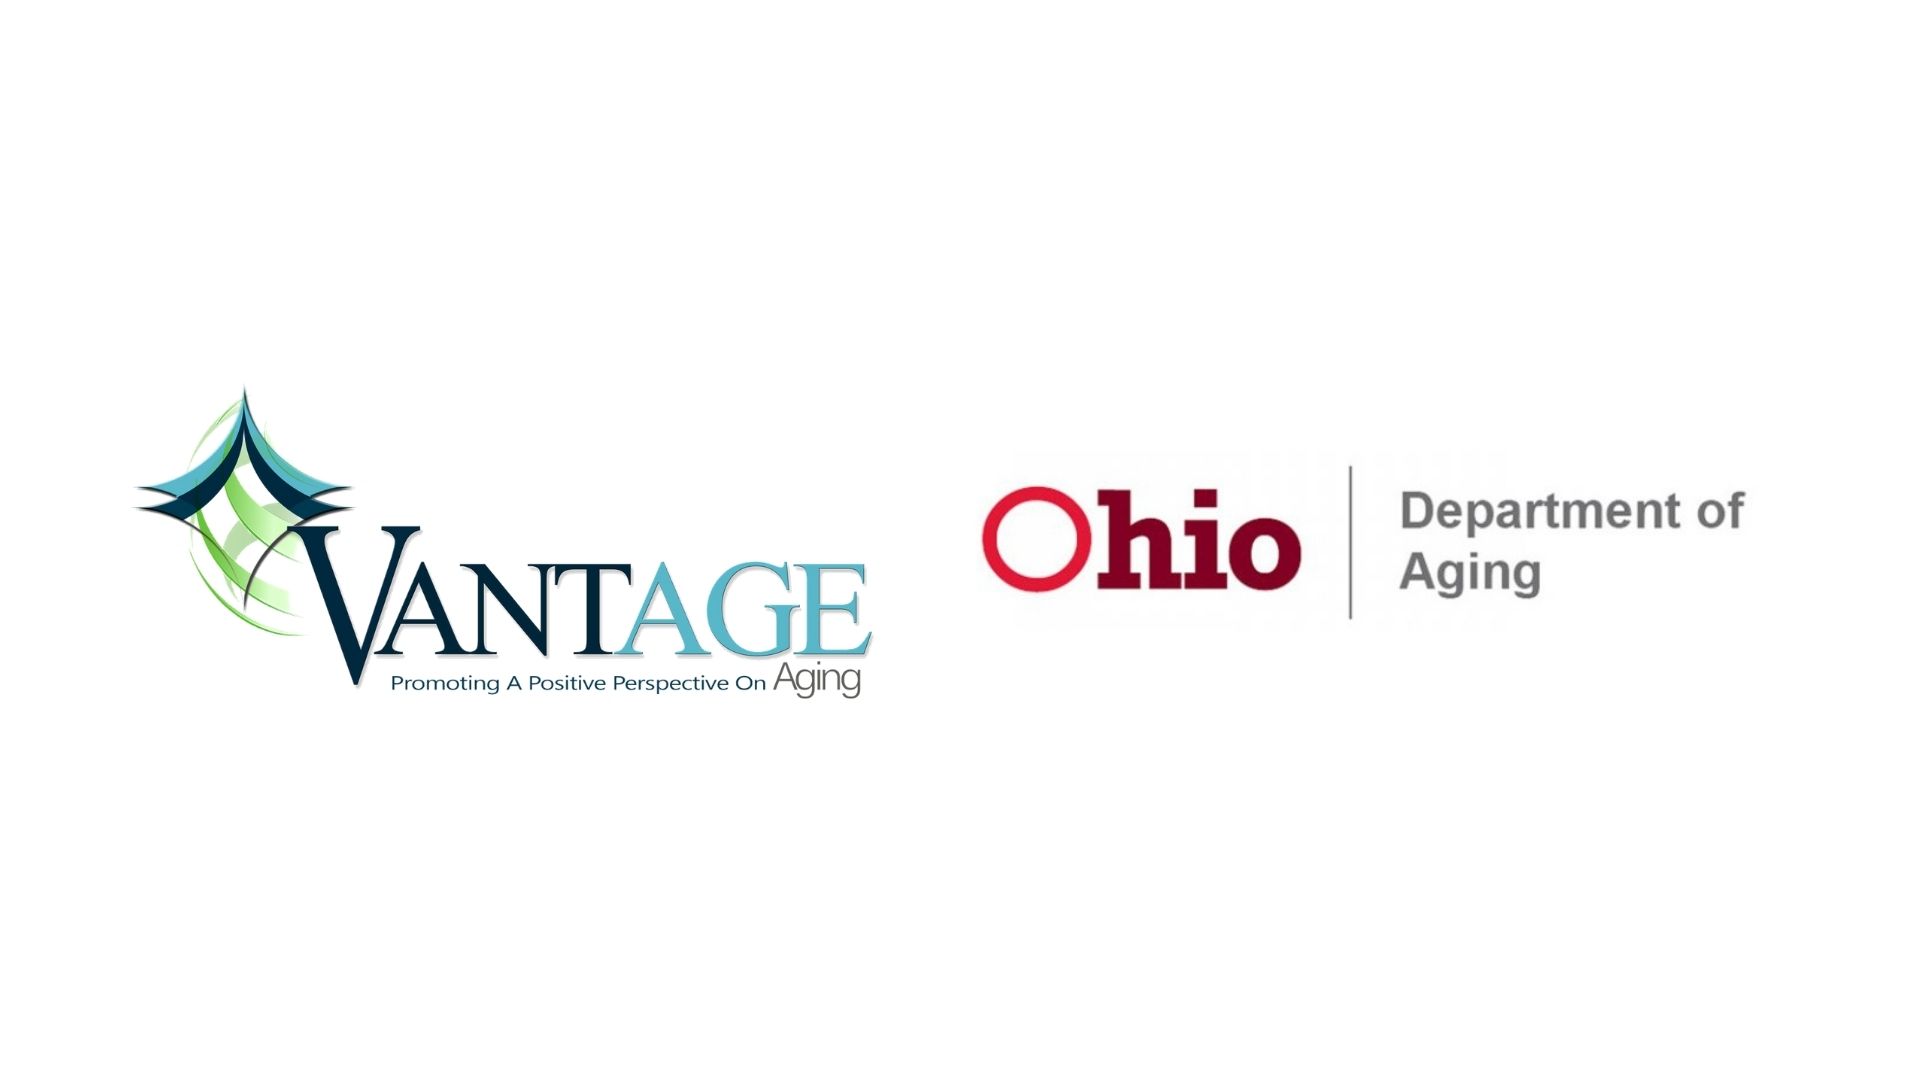 VANTAGE Aging and the Ohio Department of Aging Aim to Shrink the Digital Divide Among Older Job Seekers